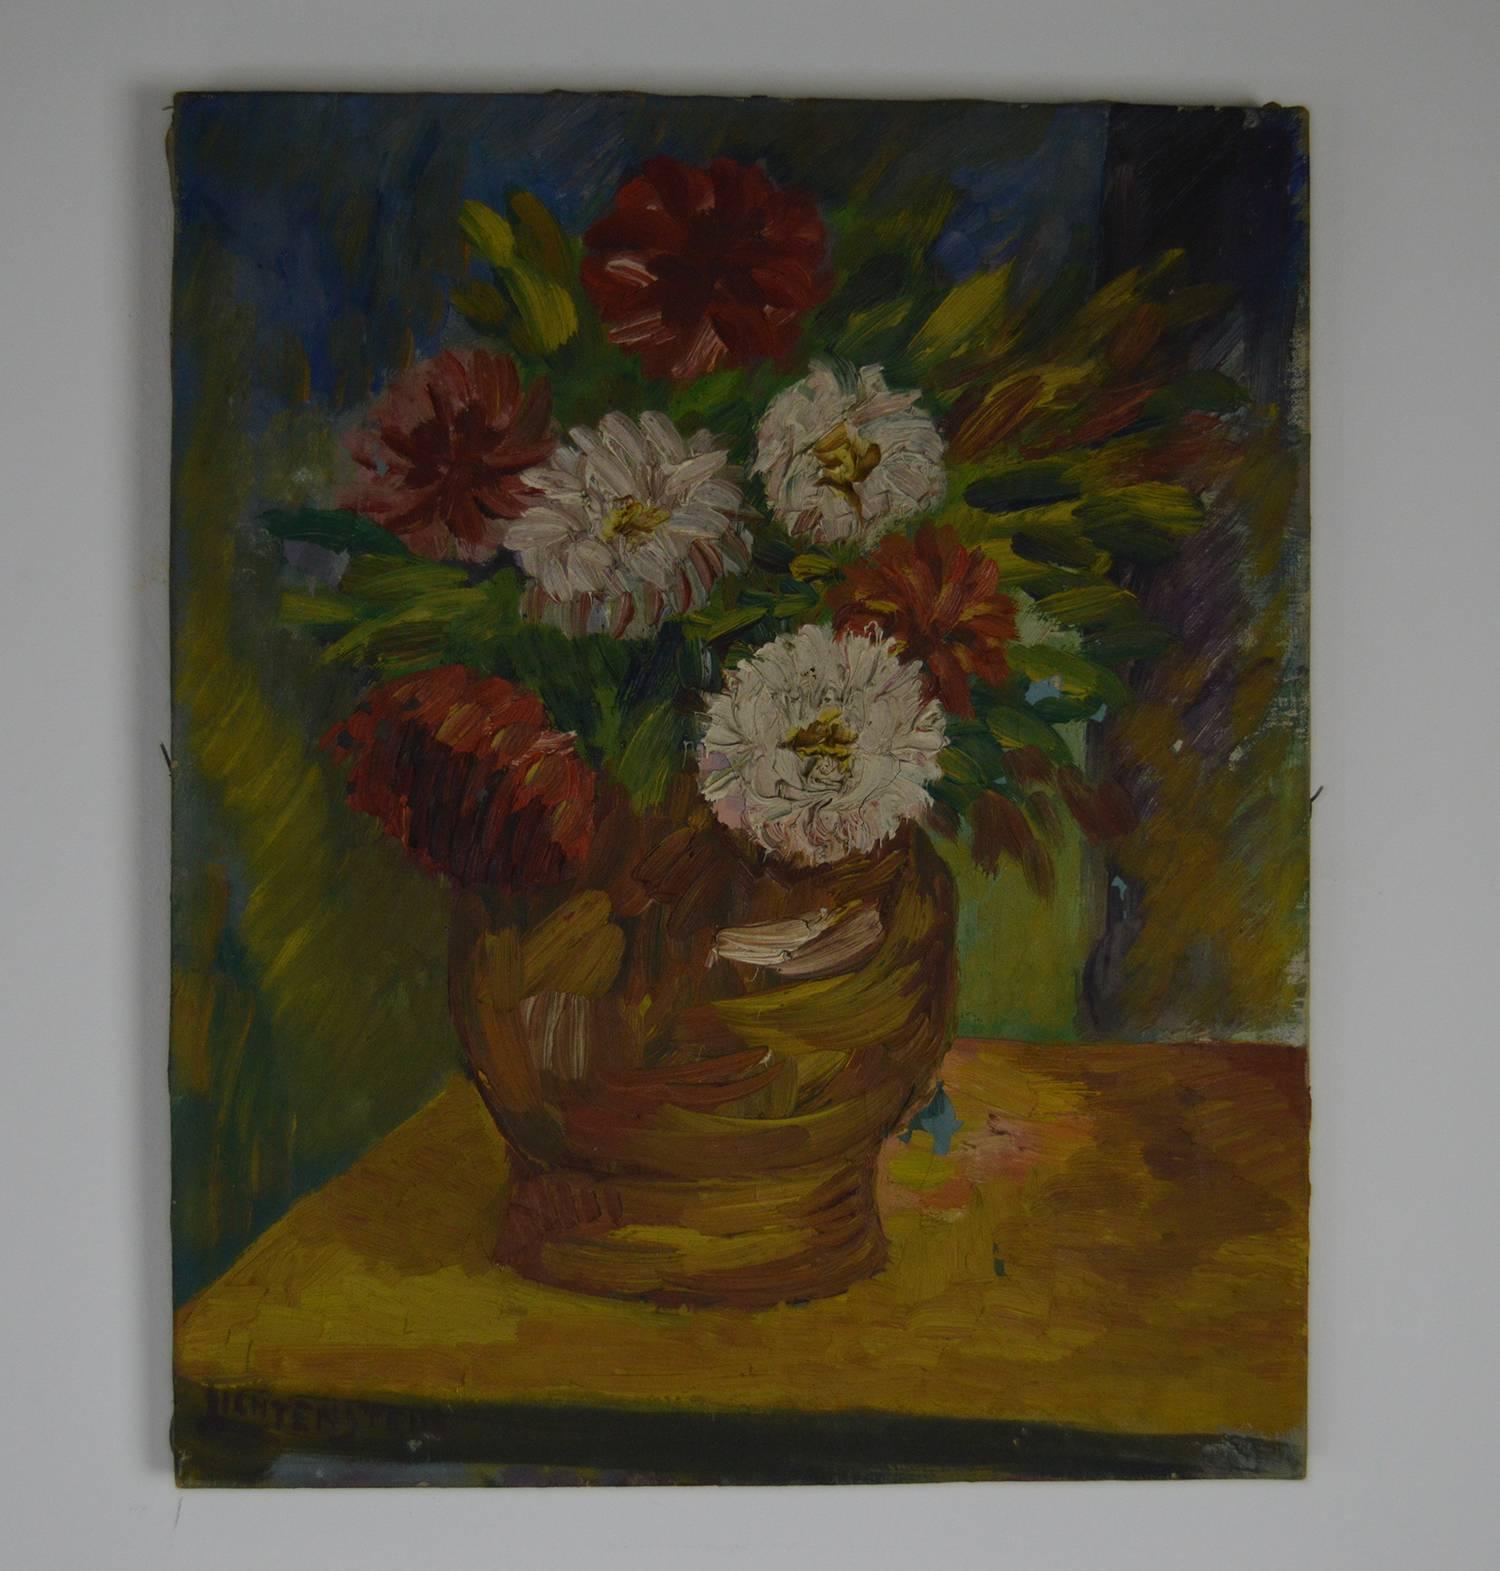 Wonderful painting of chrysanthemums in delightful bright colors.

Oil on canvas. Unframed. Signed lower left.

Painted in high relief particularly the flowers.

By Isaac Lichtenstein. Born Poland 1887-1981. Studied in Paris. Jewish emigree.